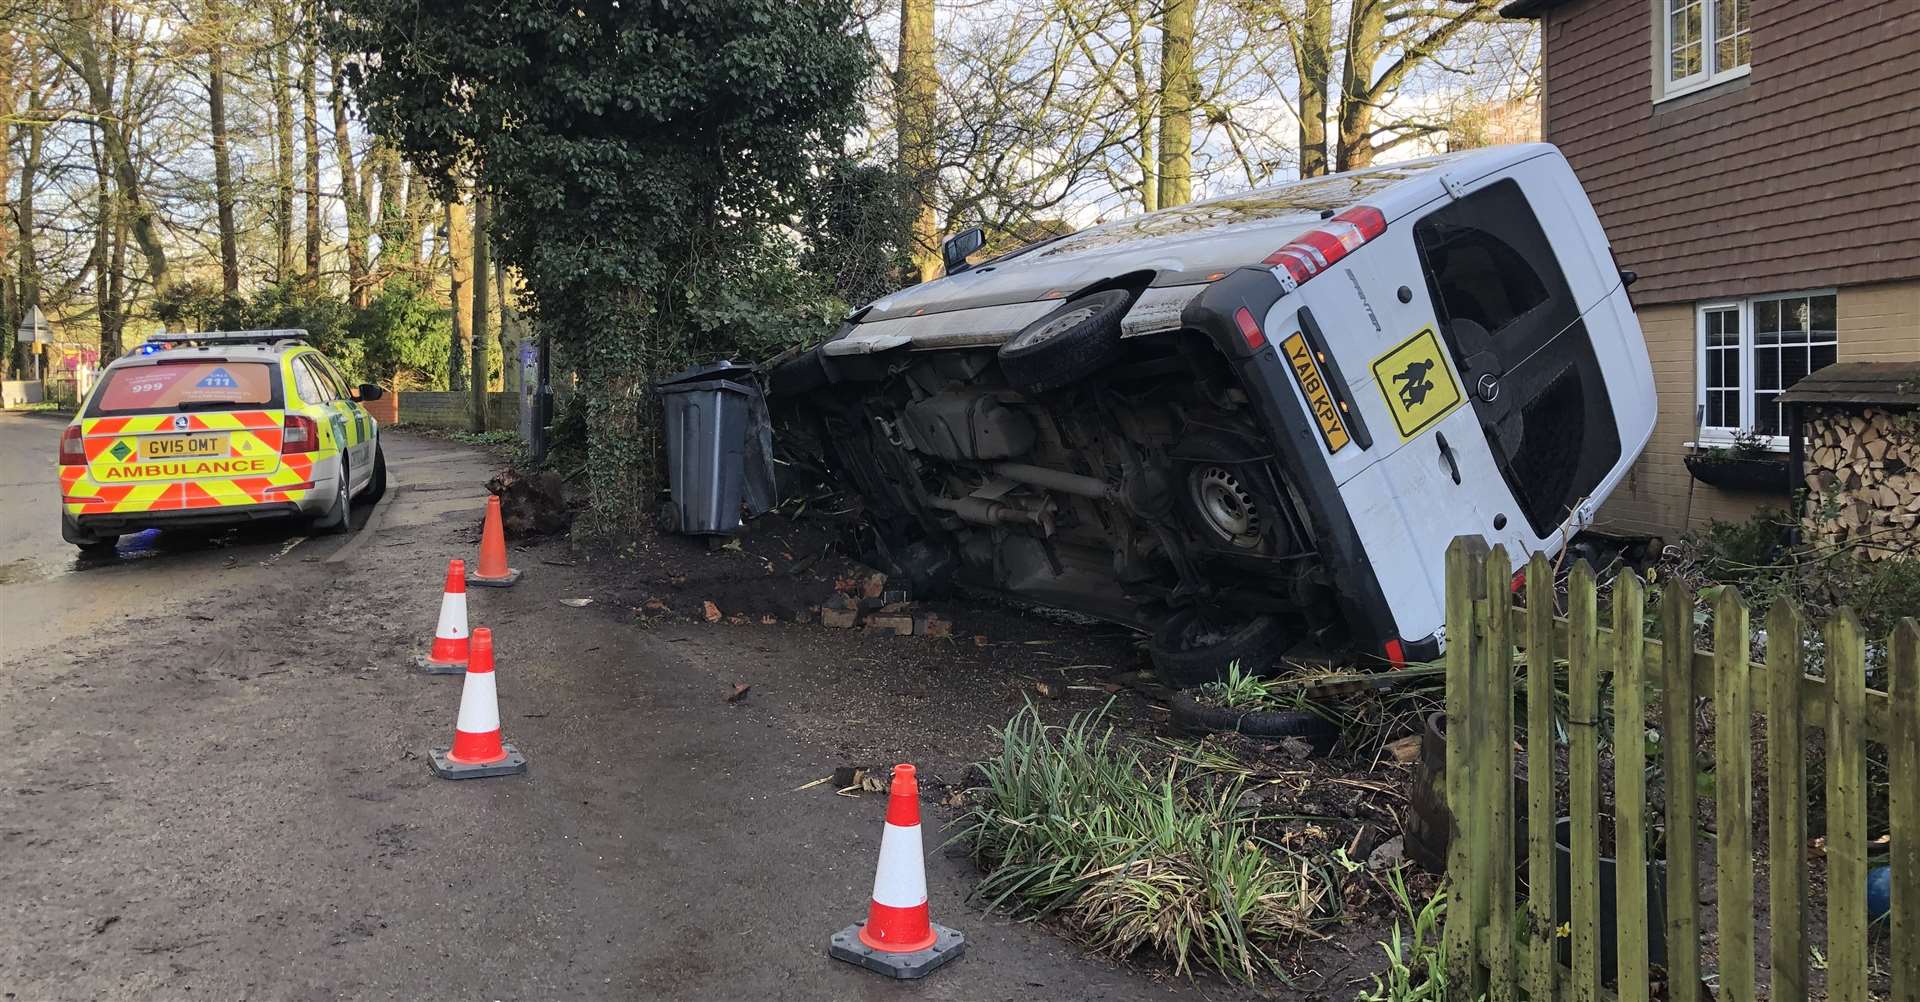 A minibus carrying children crashed into a front garden in Eyhorne Street last month